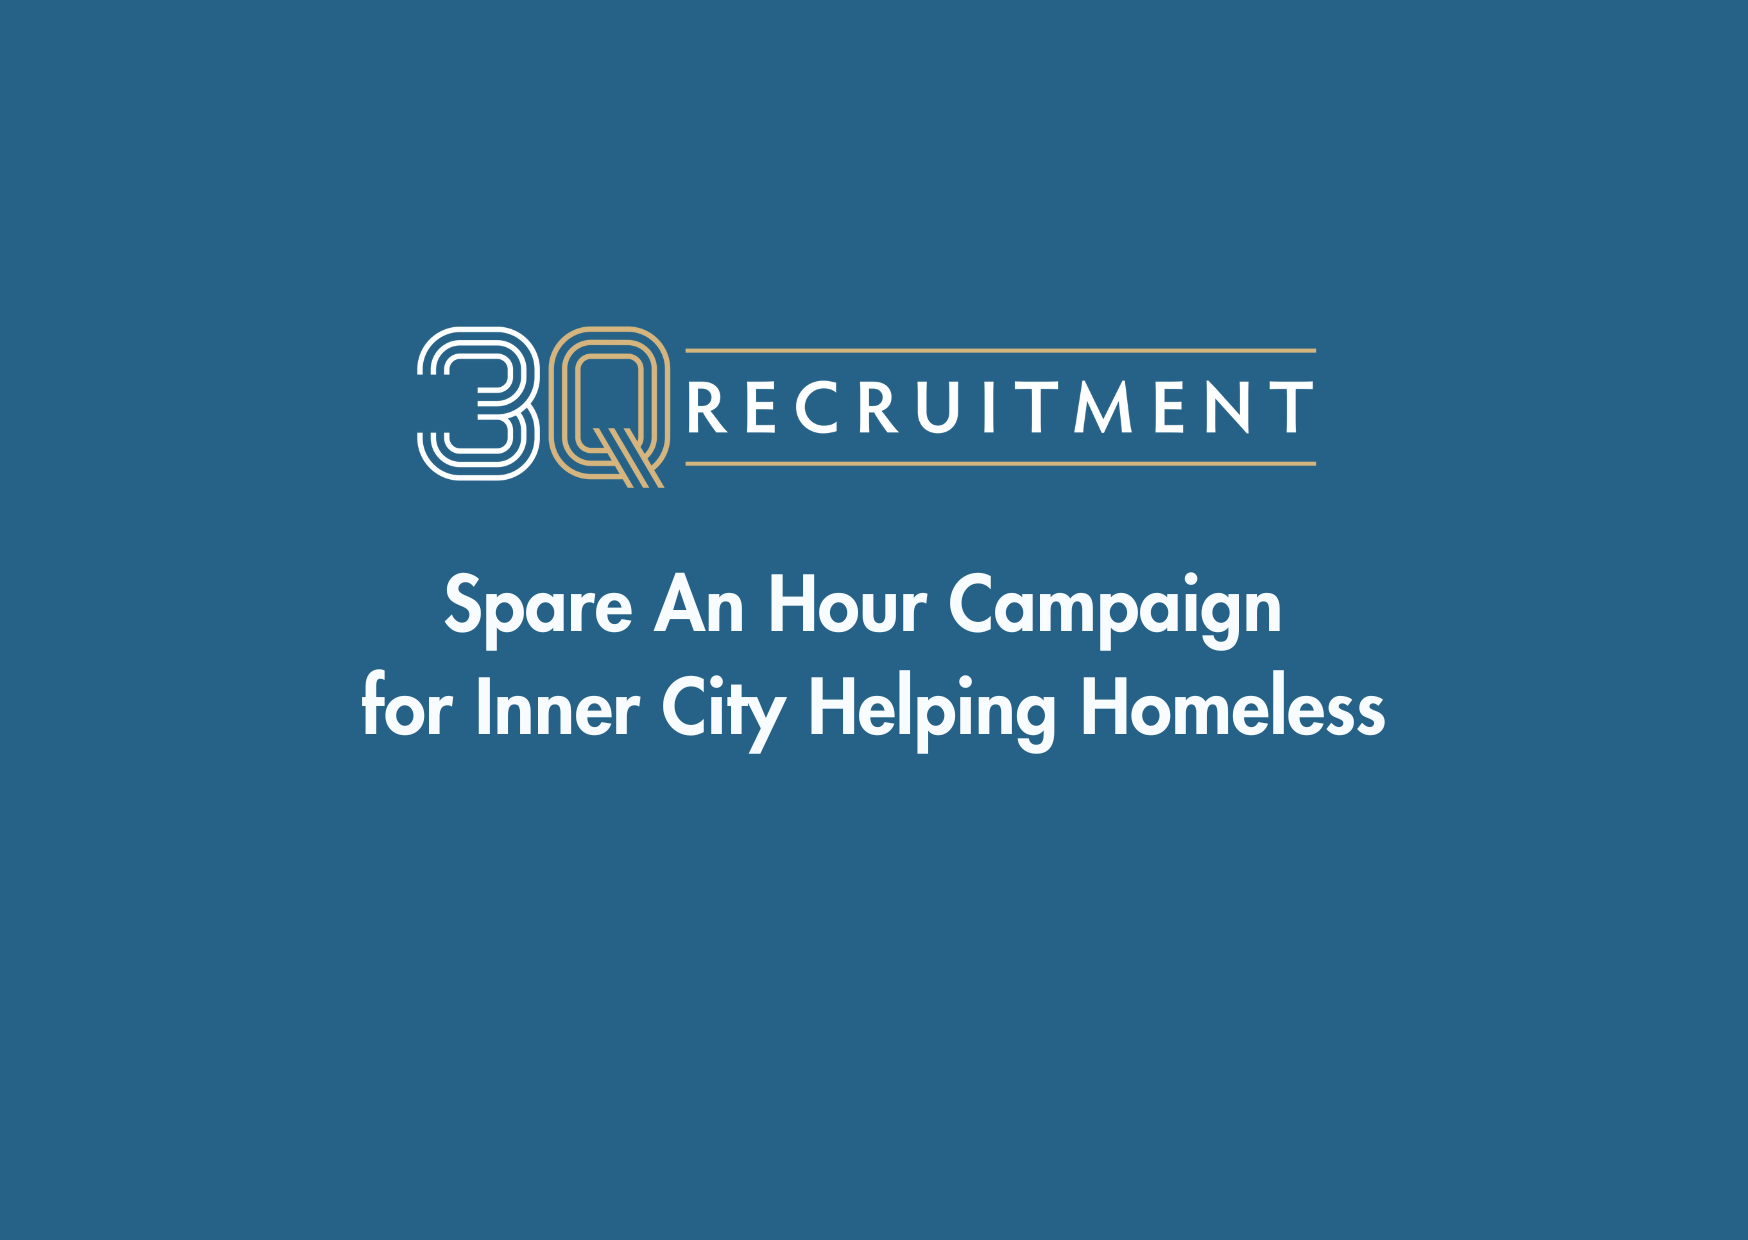 3Q Recruitment Spare An Hour Campaign for Inner City Helping Homeless